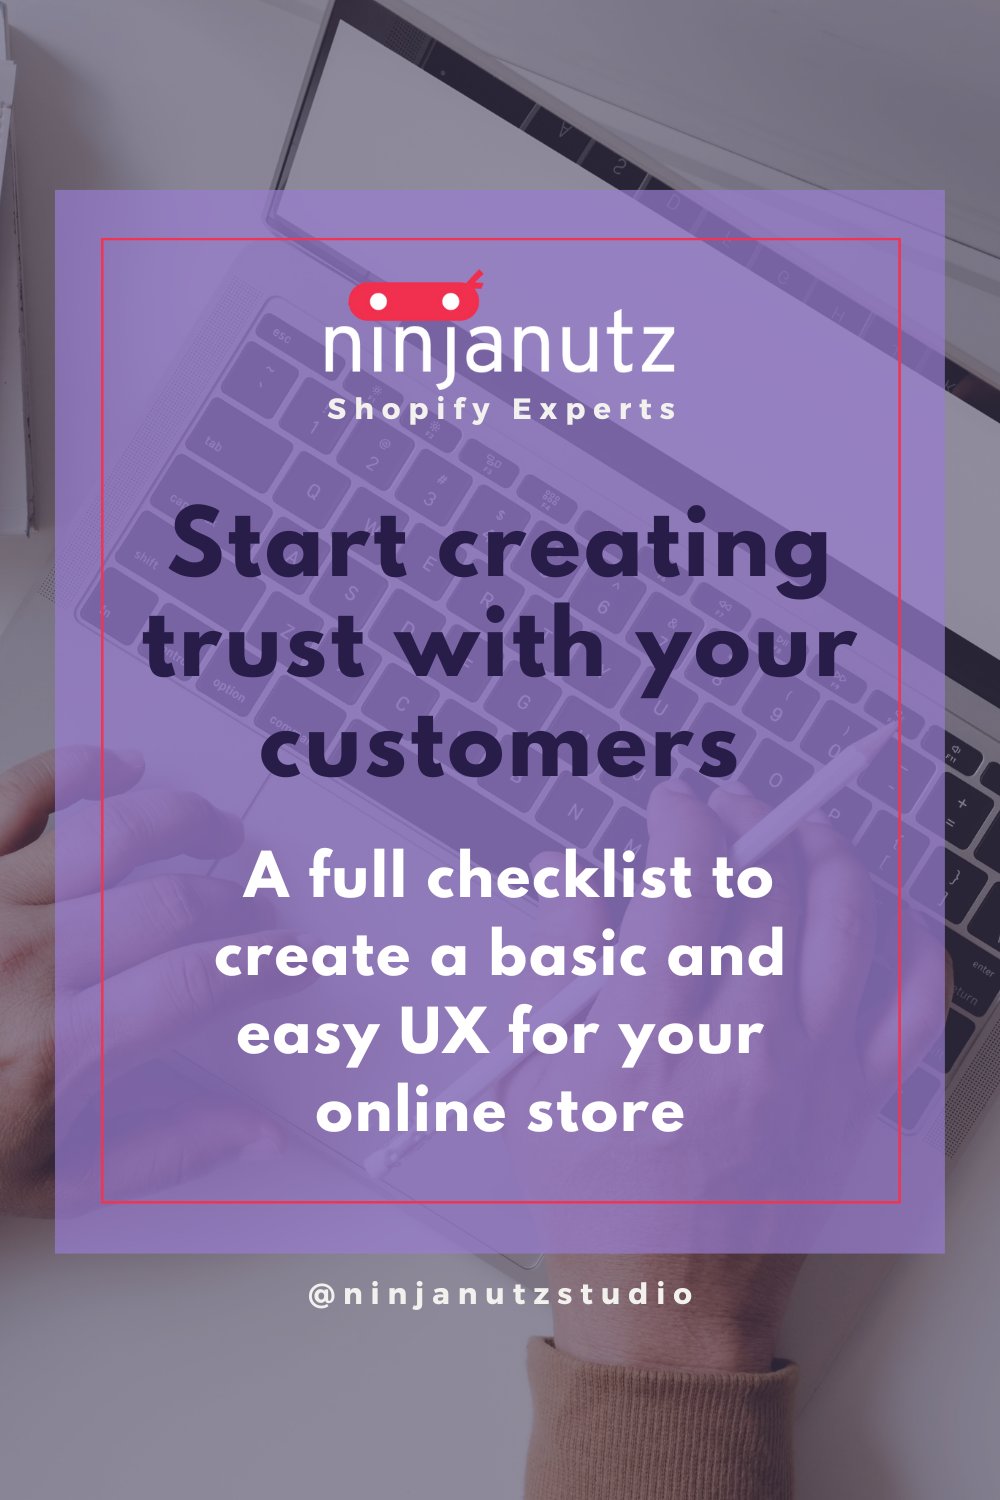 Start creating trust with your customers, a full checklist to create a basic and easy UX for your online store NinjaNutz®